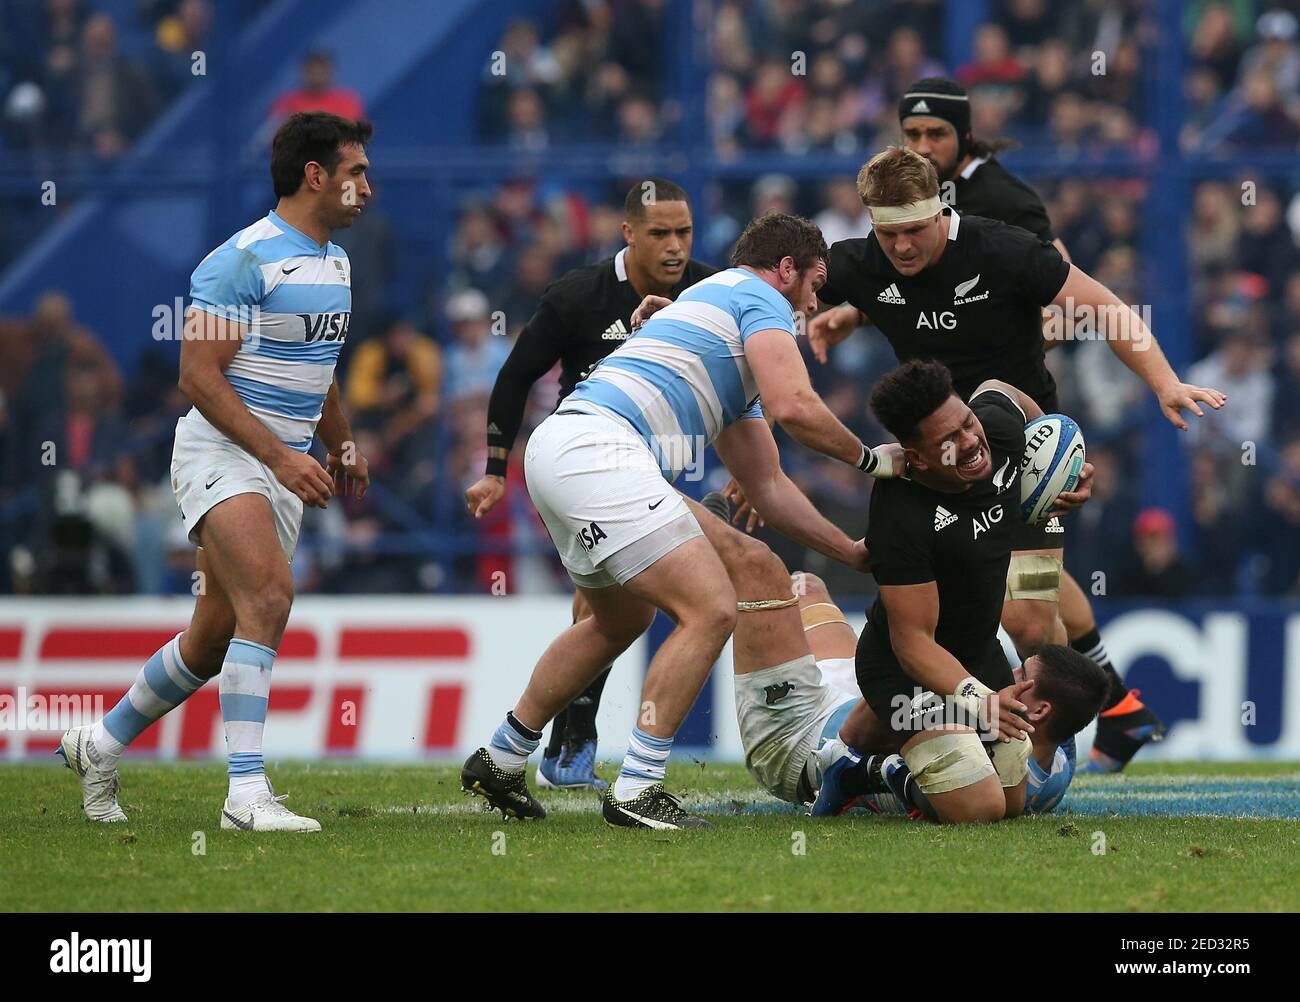 Rugby Union - Rugby Championship - Argentina v New Zealand - Jose  Amalfitani Stadium, Buenos Aires, Argentina - July 20, 2019 New Zealand's  Ardie Savea in action REUTERS/Agustin Marcarian Stock Photo - Alamy